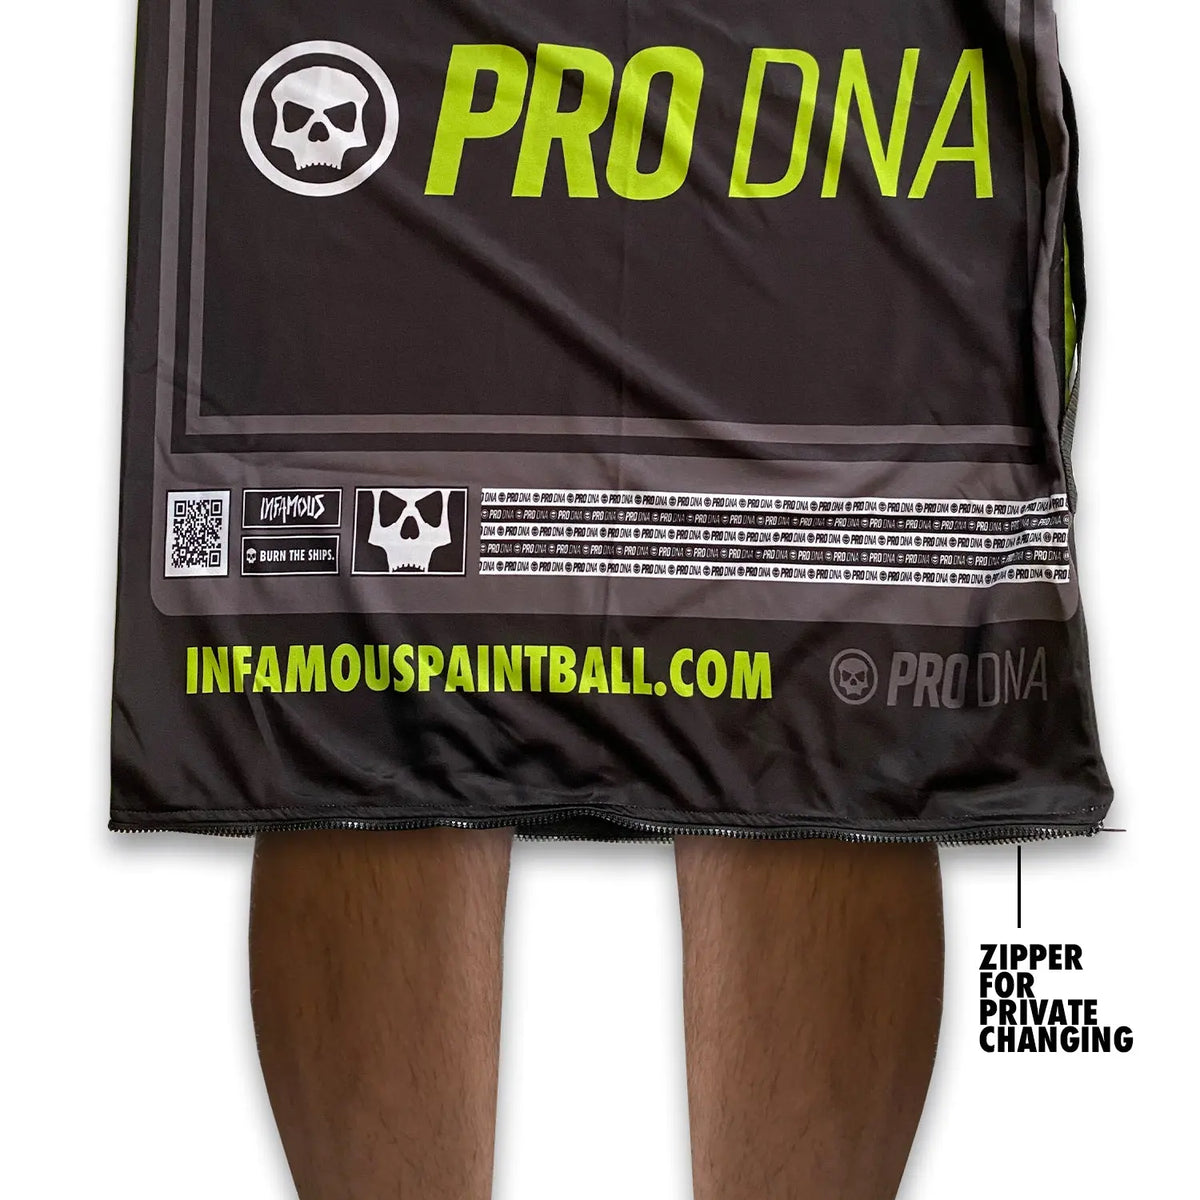 Pro DNA Pod / Changing Gear Bag Infamous Paintball